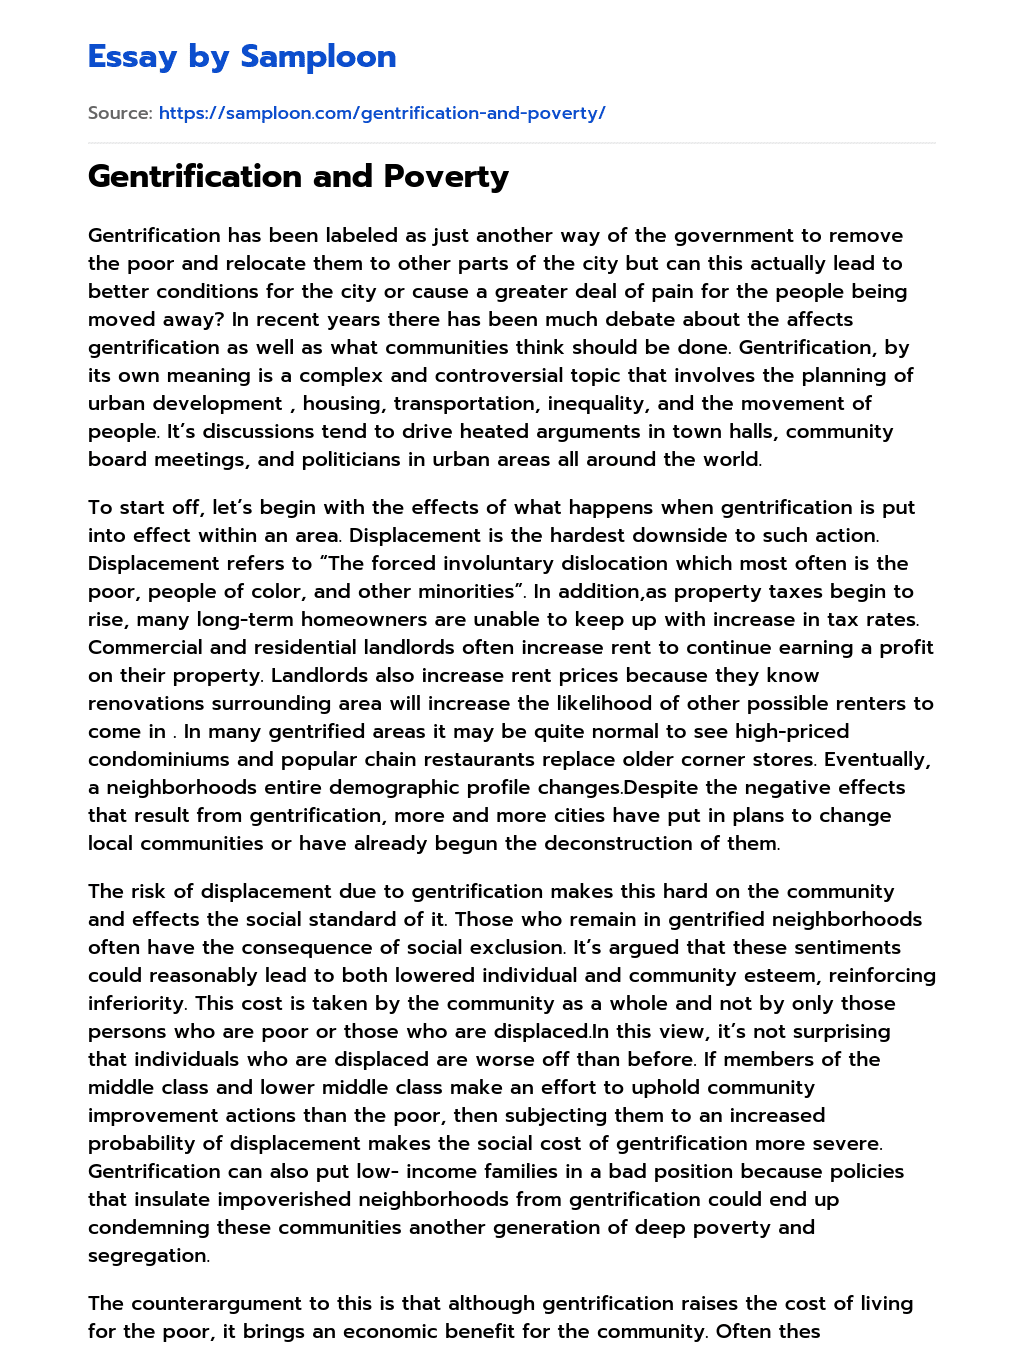 Gentrification and Poverty essay